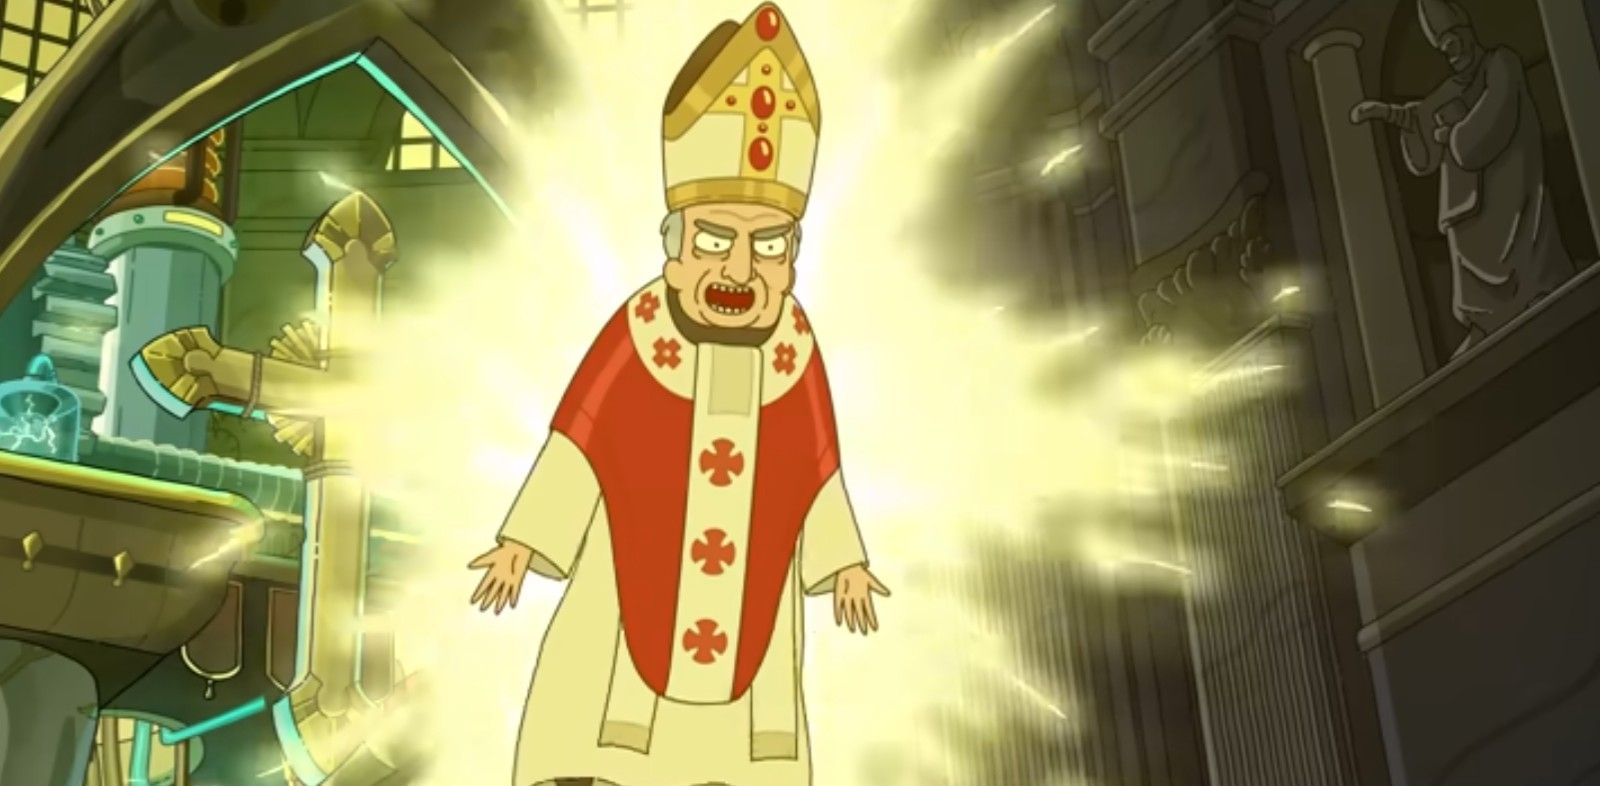 The Pope using his powers in Rick and Morty